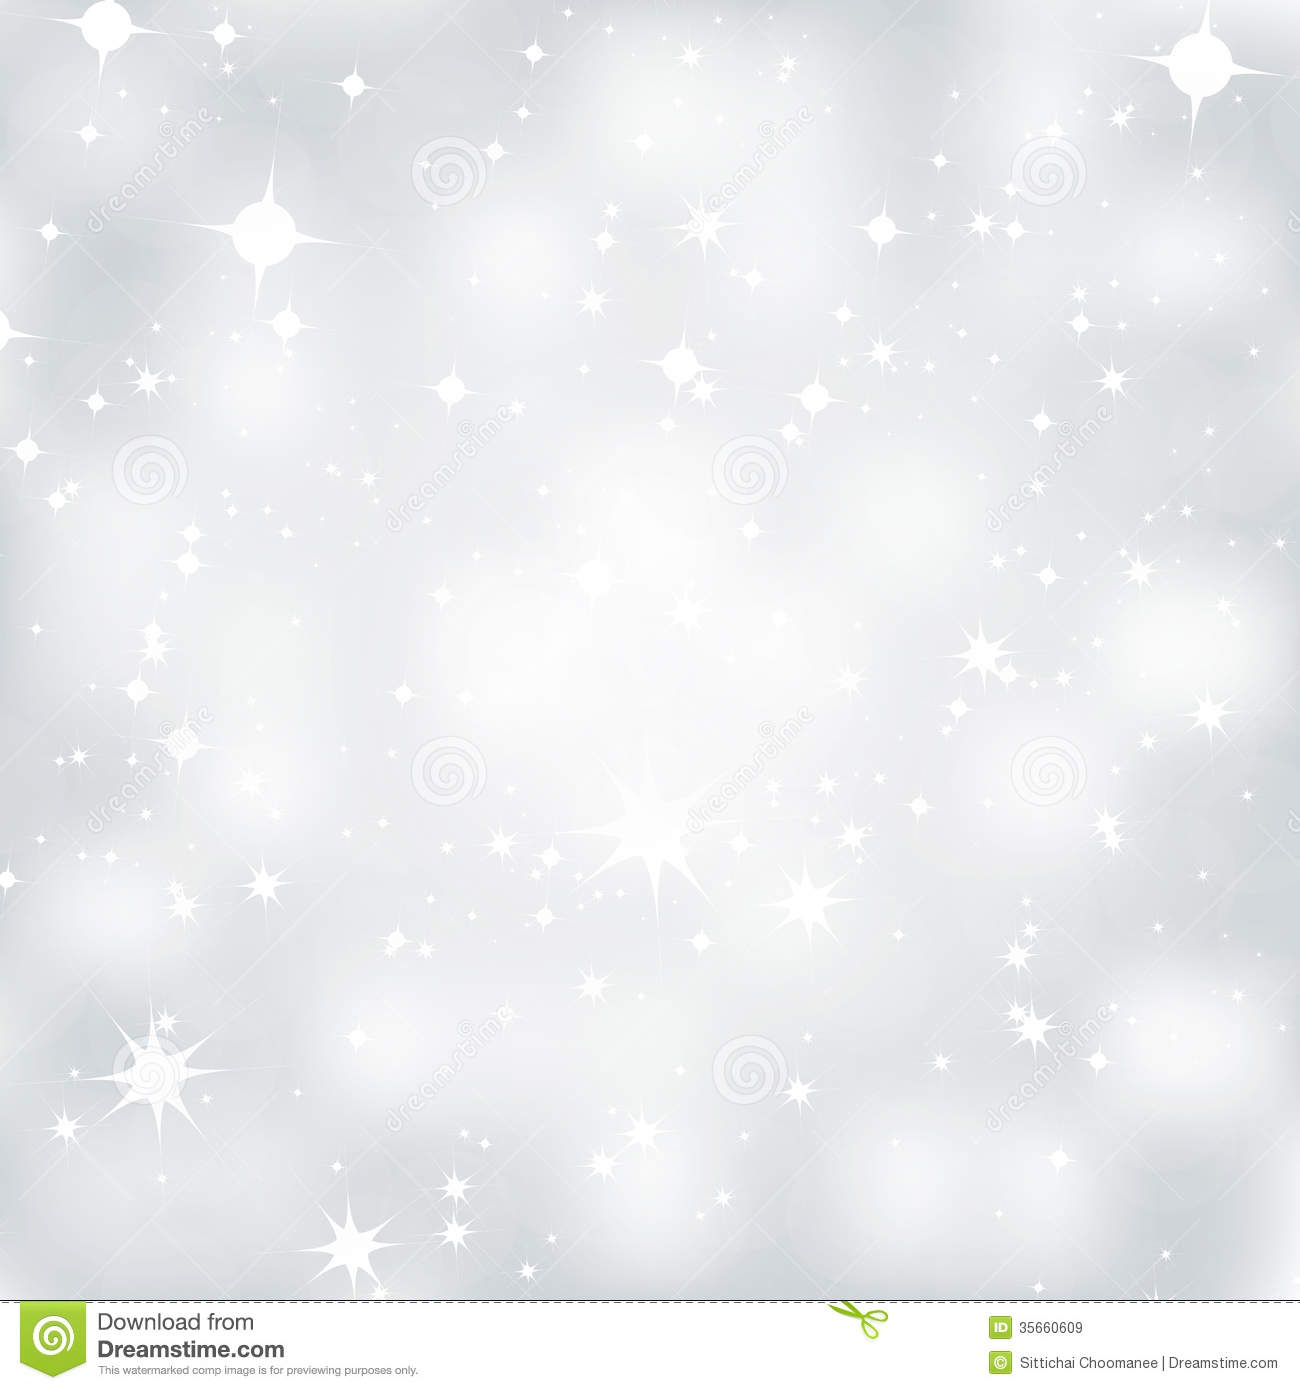 Printable Snowflakes Stock Vector. Illustration Of Greeting - 35660609 - Free Printable Backgrounds